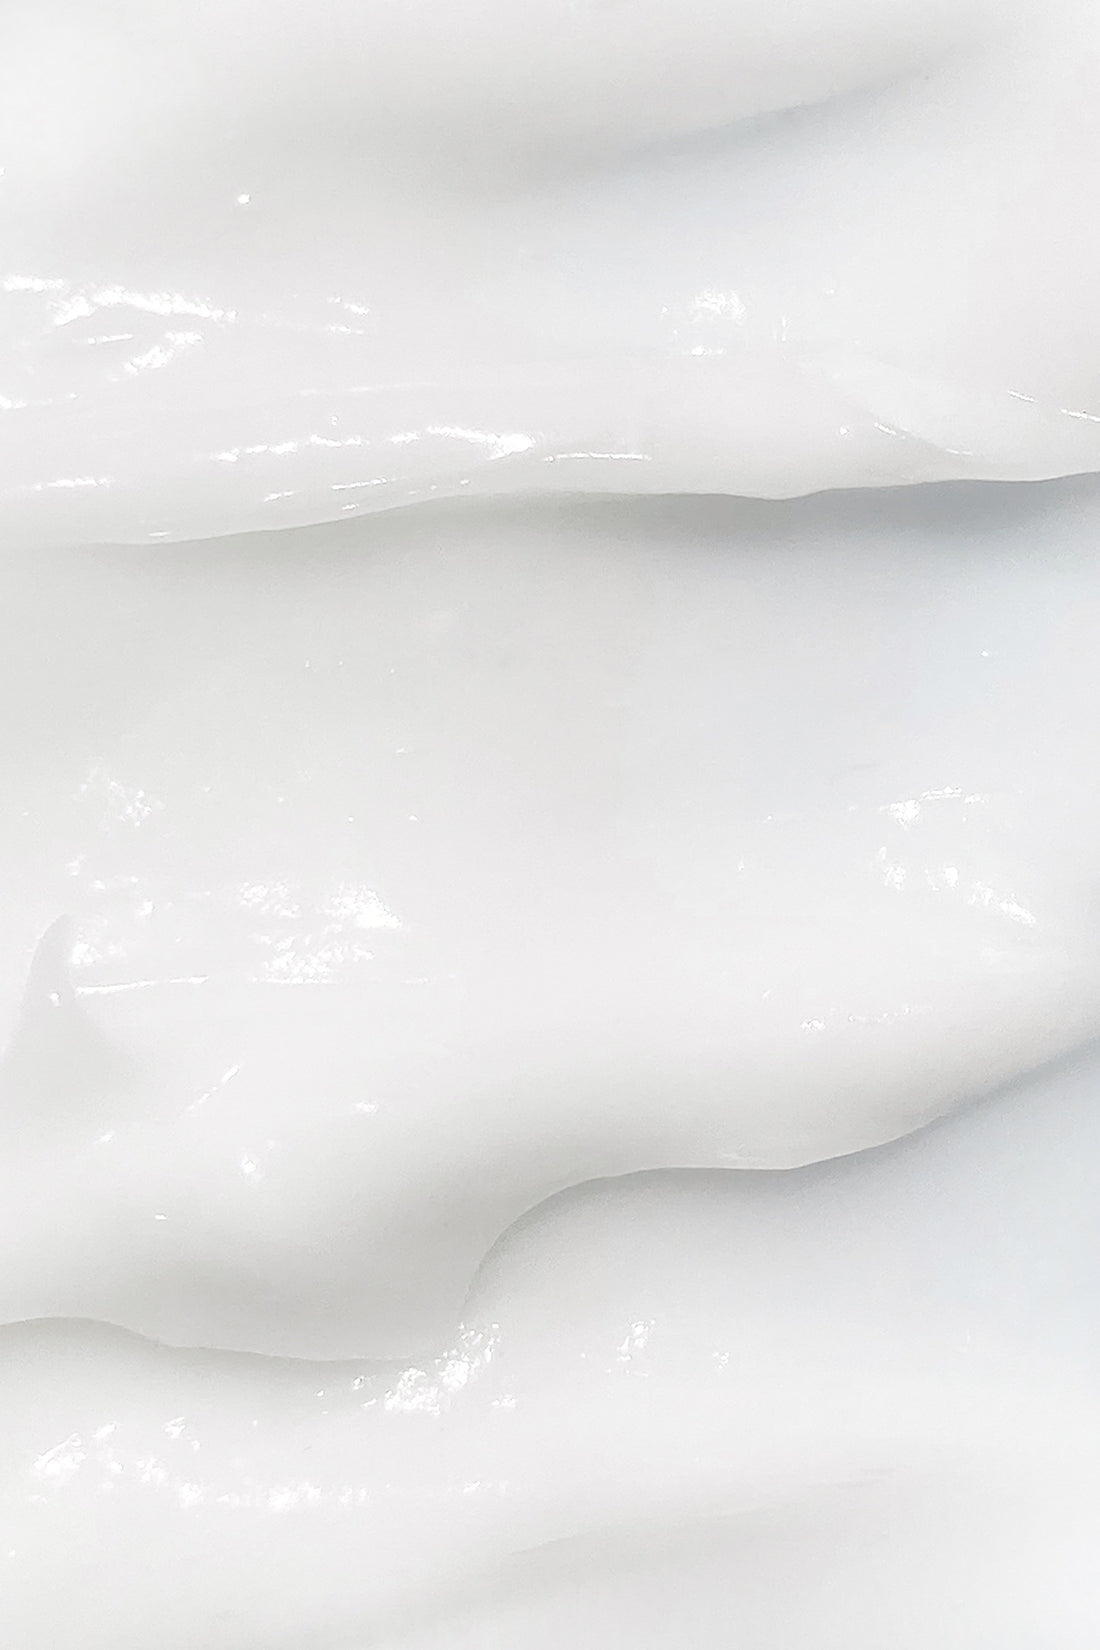 white goop image, layers of conditioner